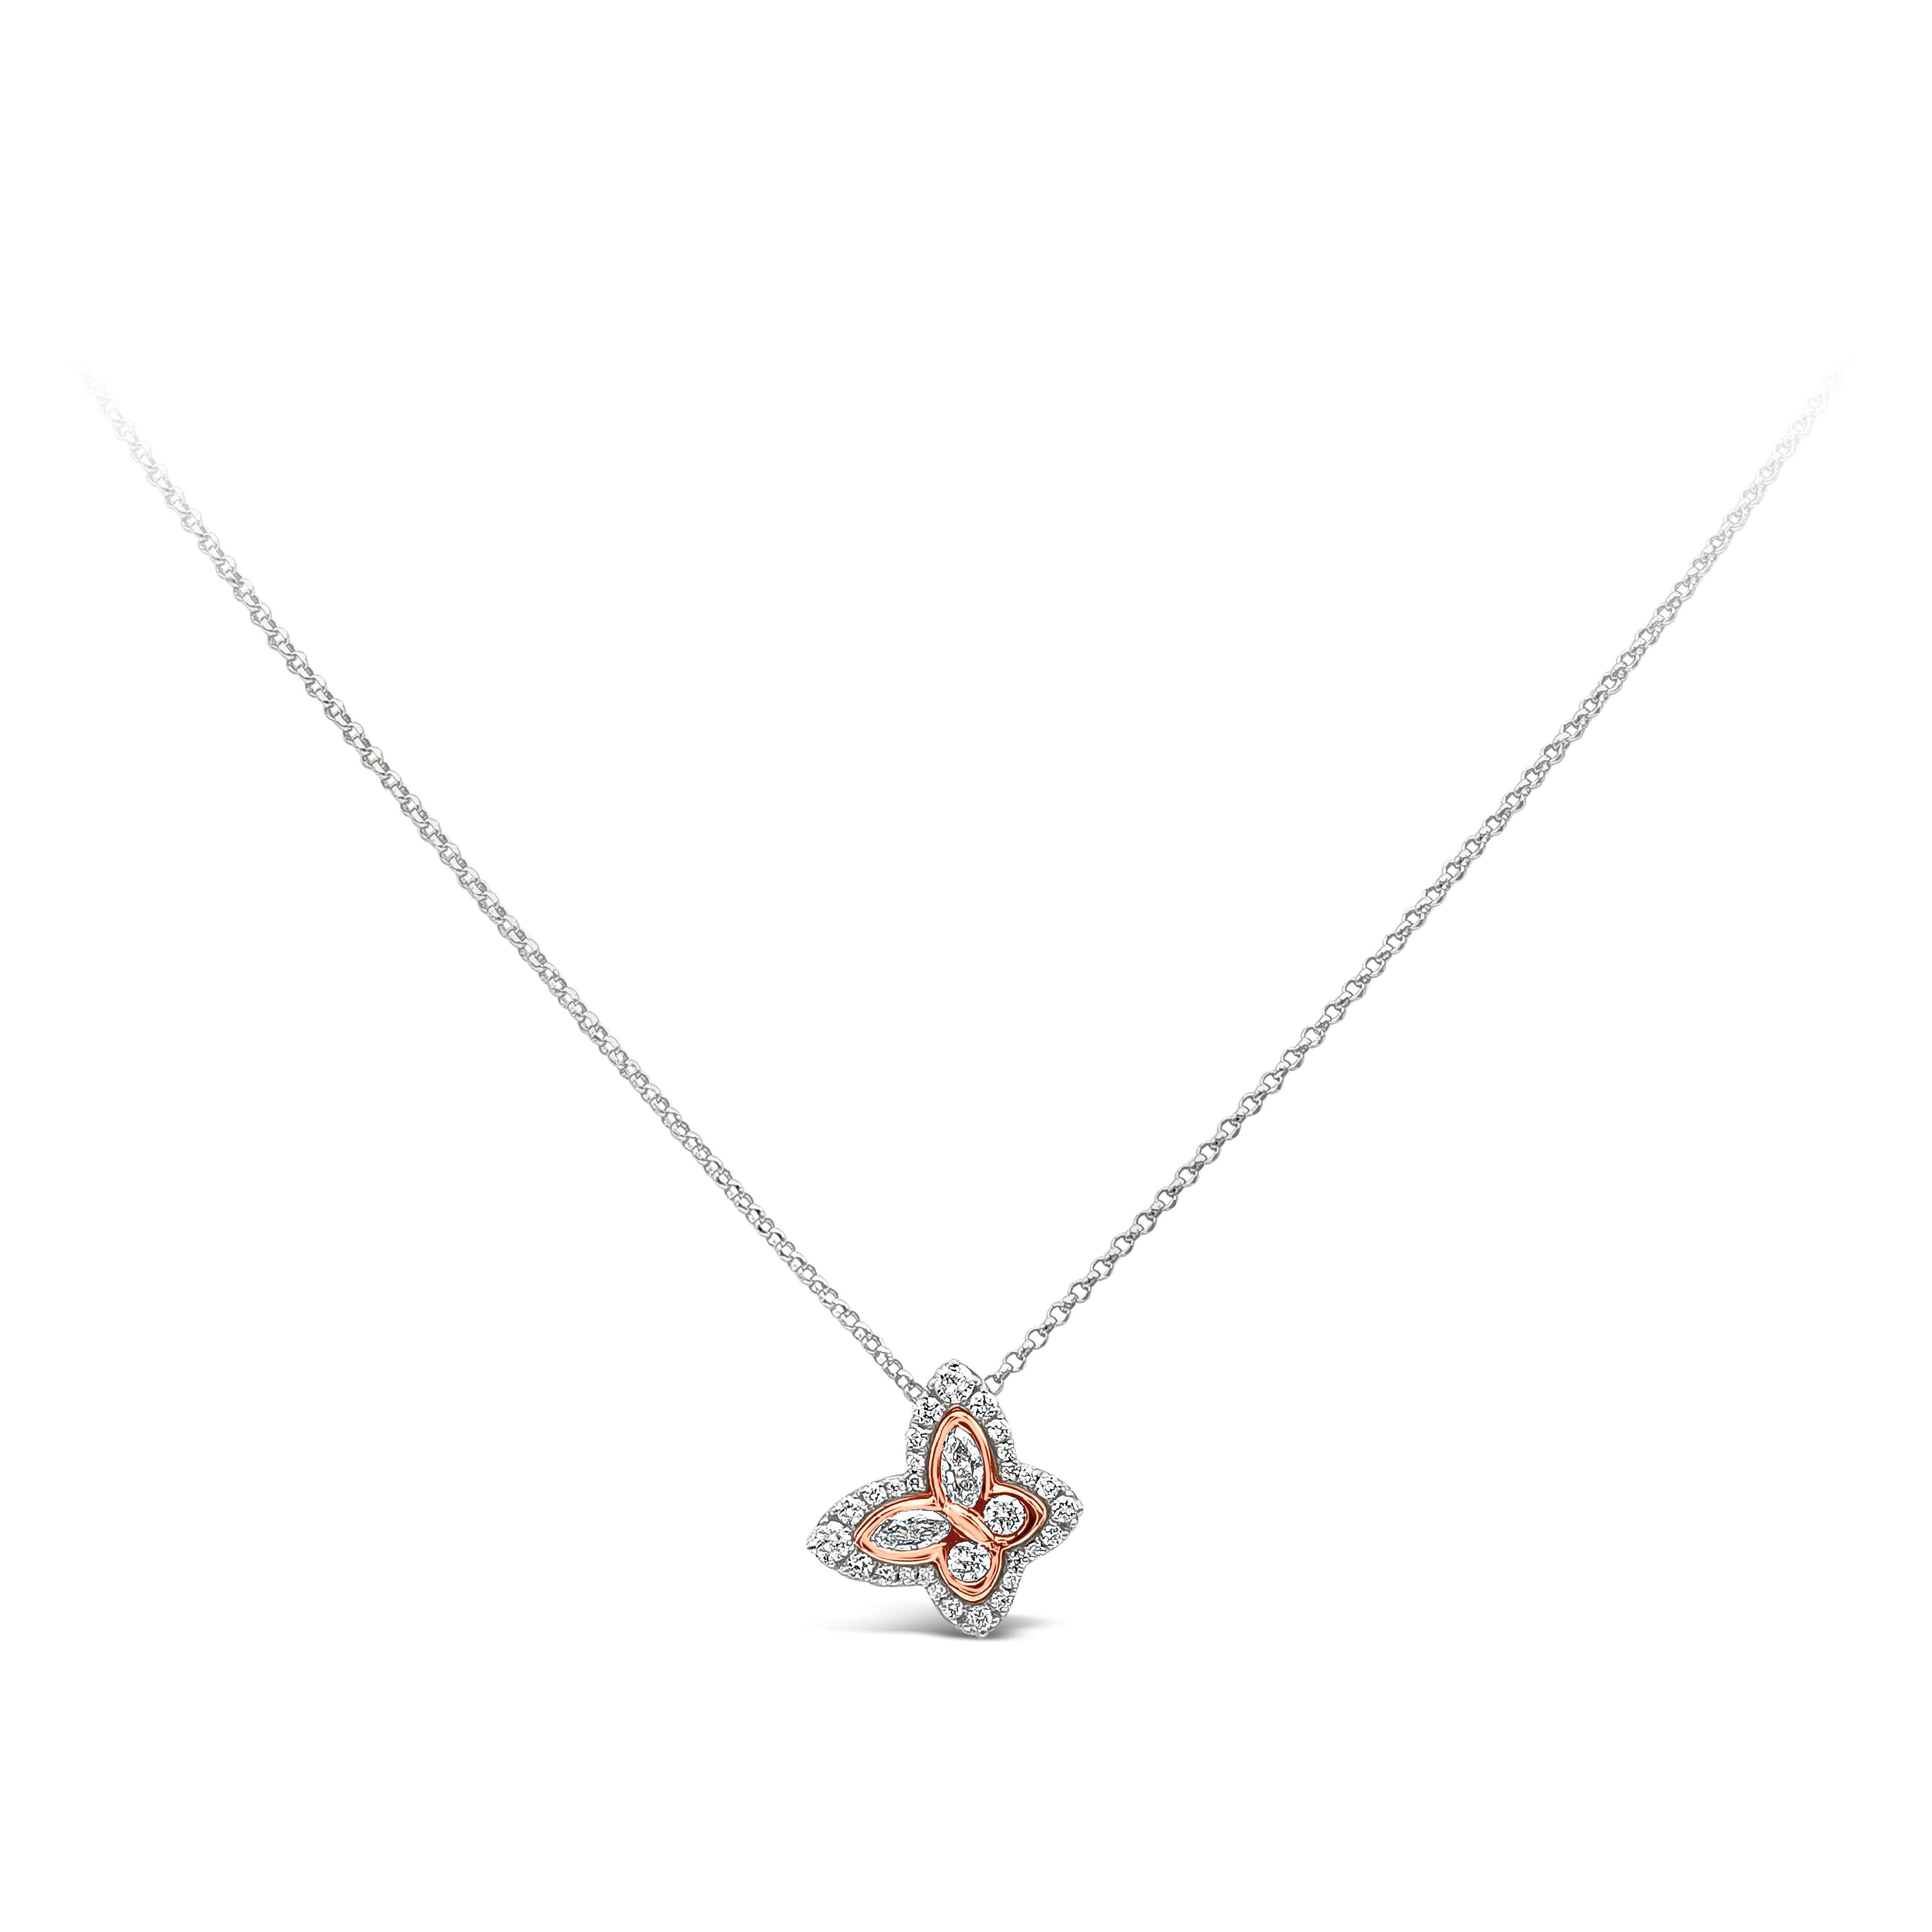 A beautiful pendant necklace showcasing a butterfly design set with brilliant diamonds in an 18K rose gold and white gold mounting. Diamonds weigh 0.37 carats total. Suspended on an 18K White Gold chain.

Roman Malakov is a custom house,